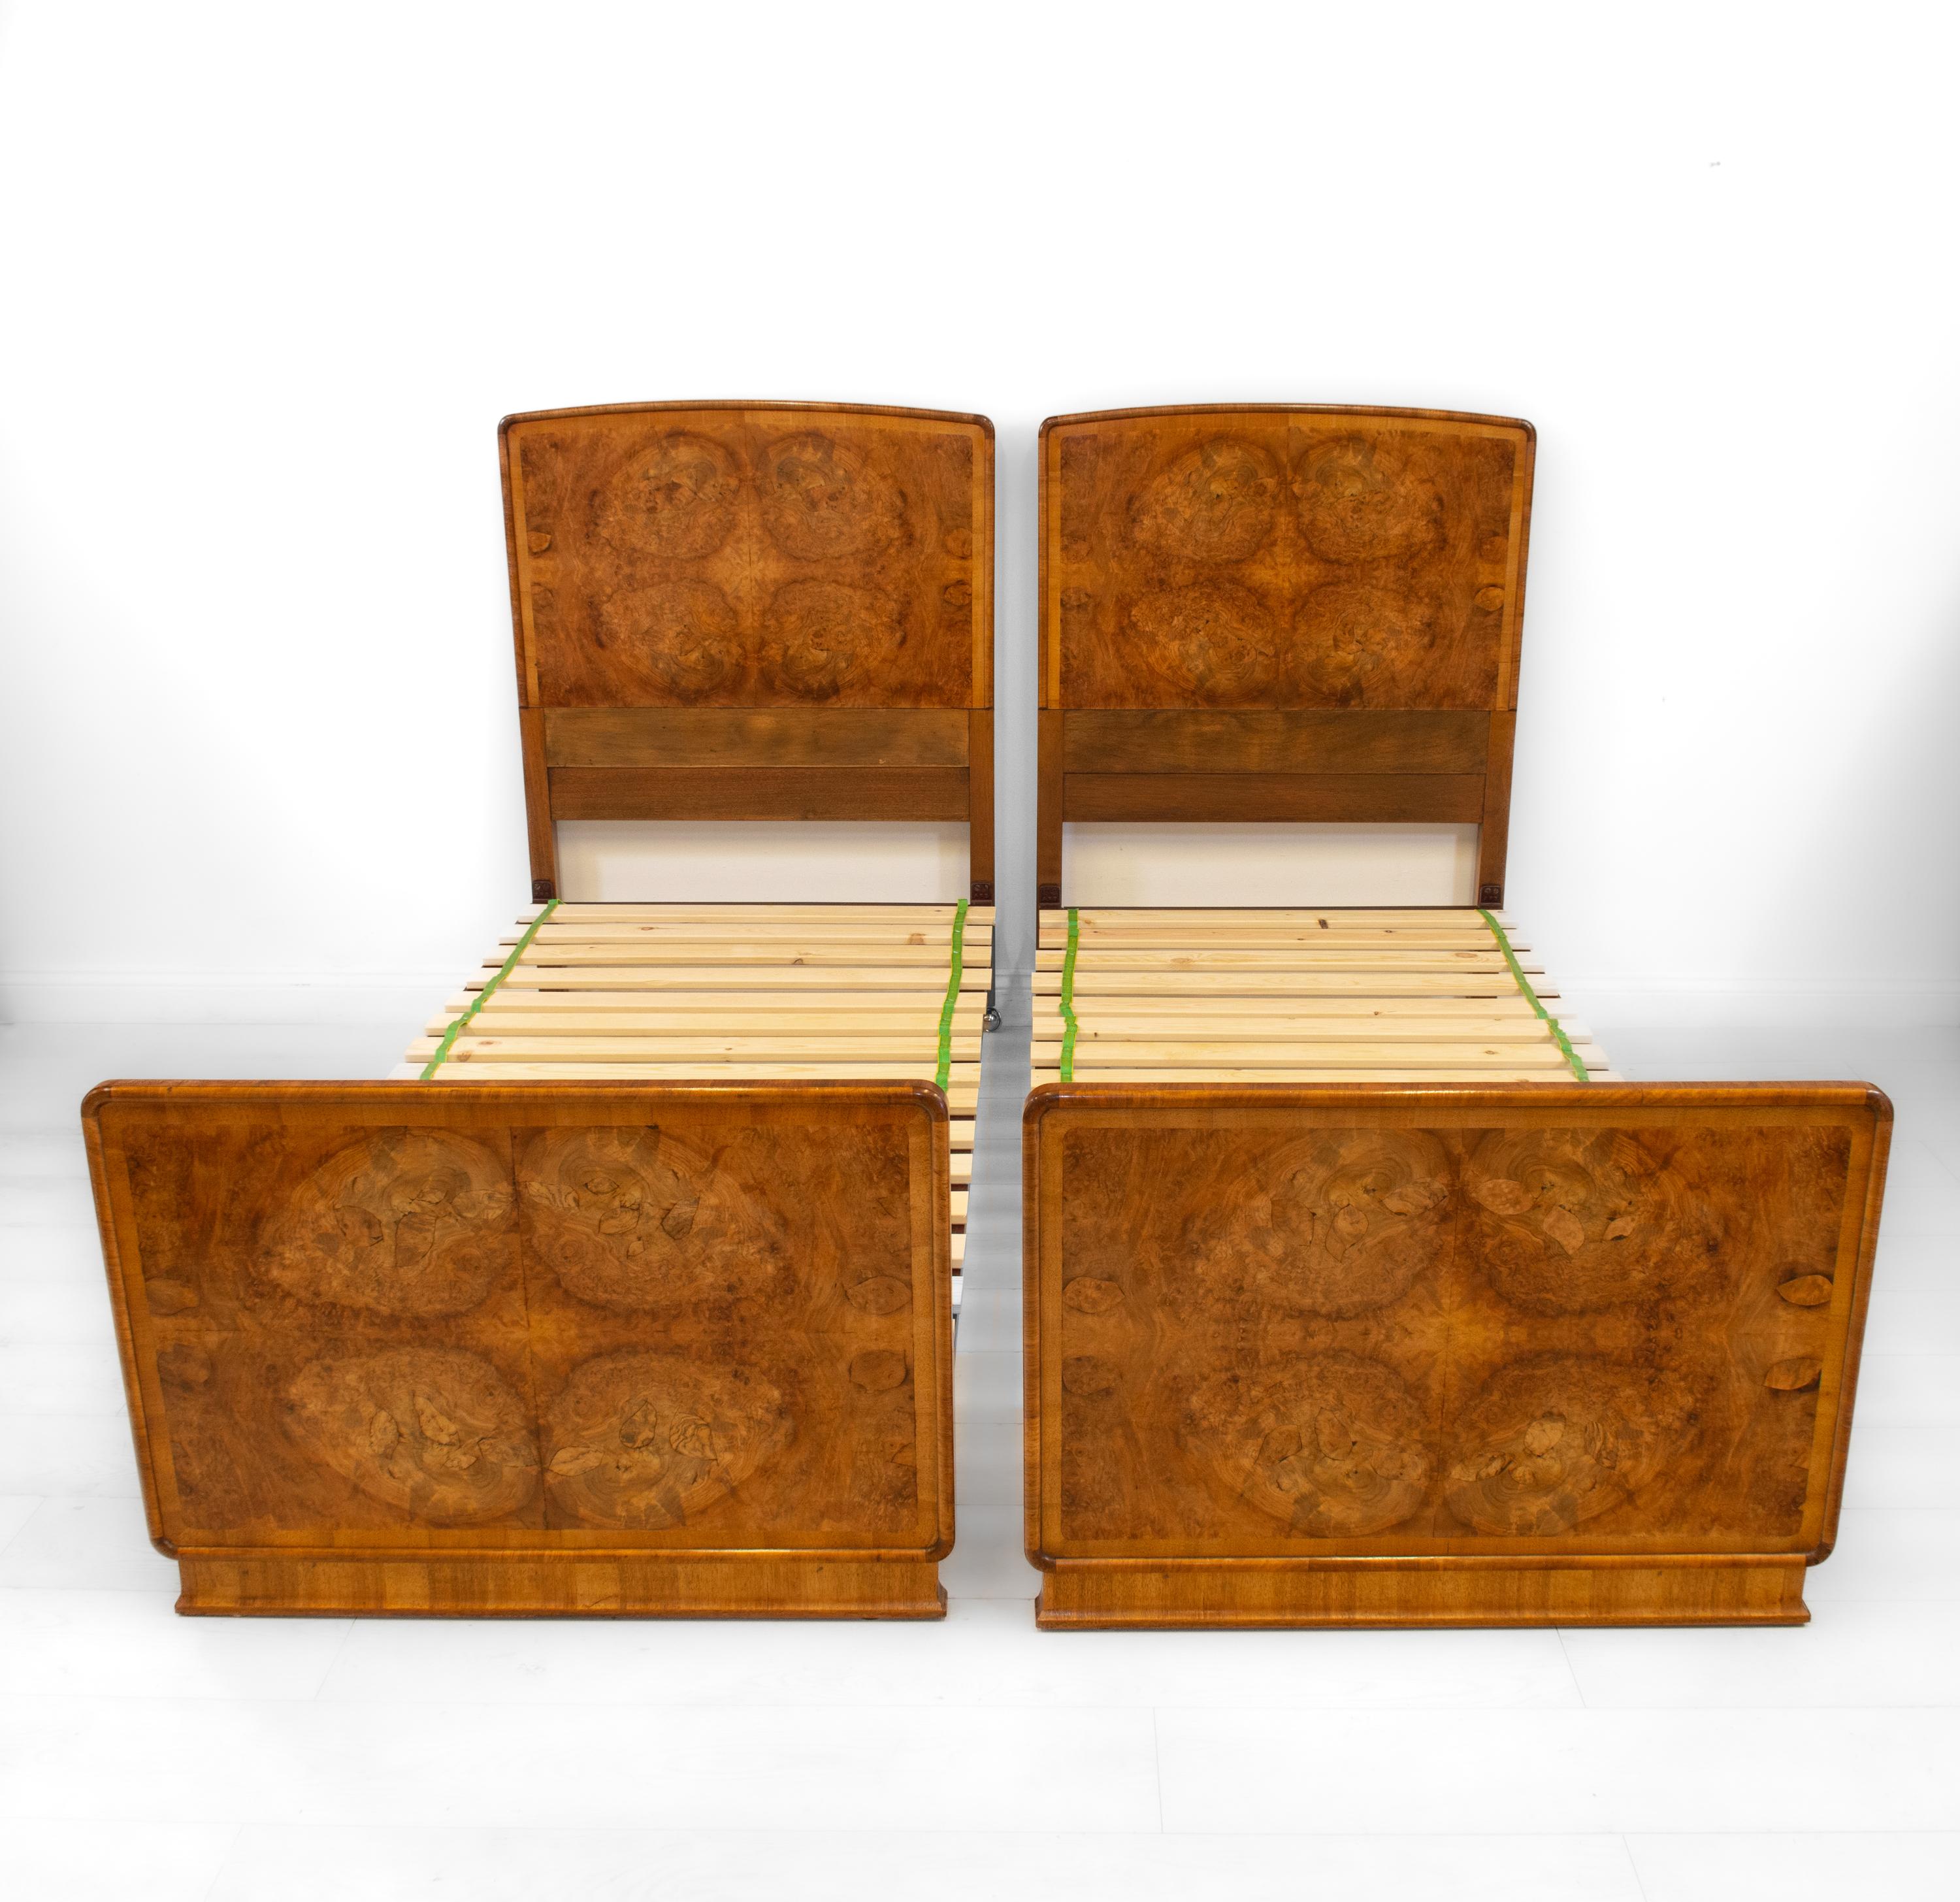 A superb pair of Art Deco burr walnut 3ft single beds, complete with side irons and wooden slats. Retailed by Harrods, London. Labelled. Circa 1930.

The headboards and the fronts of the footboards are superbly veneered in highly figured burr